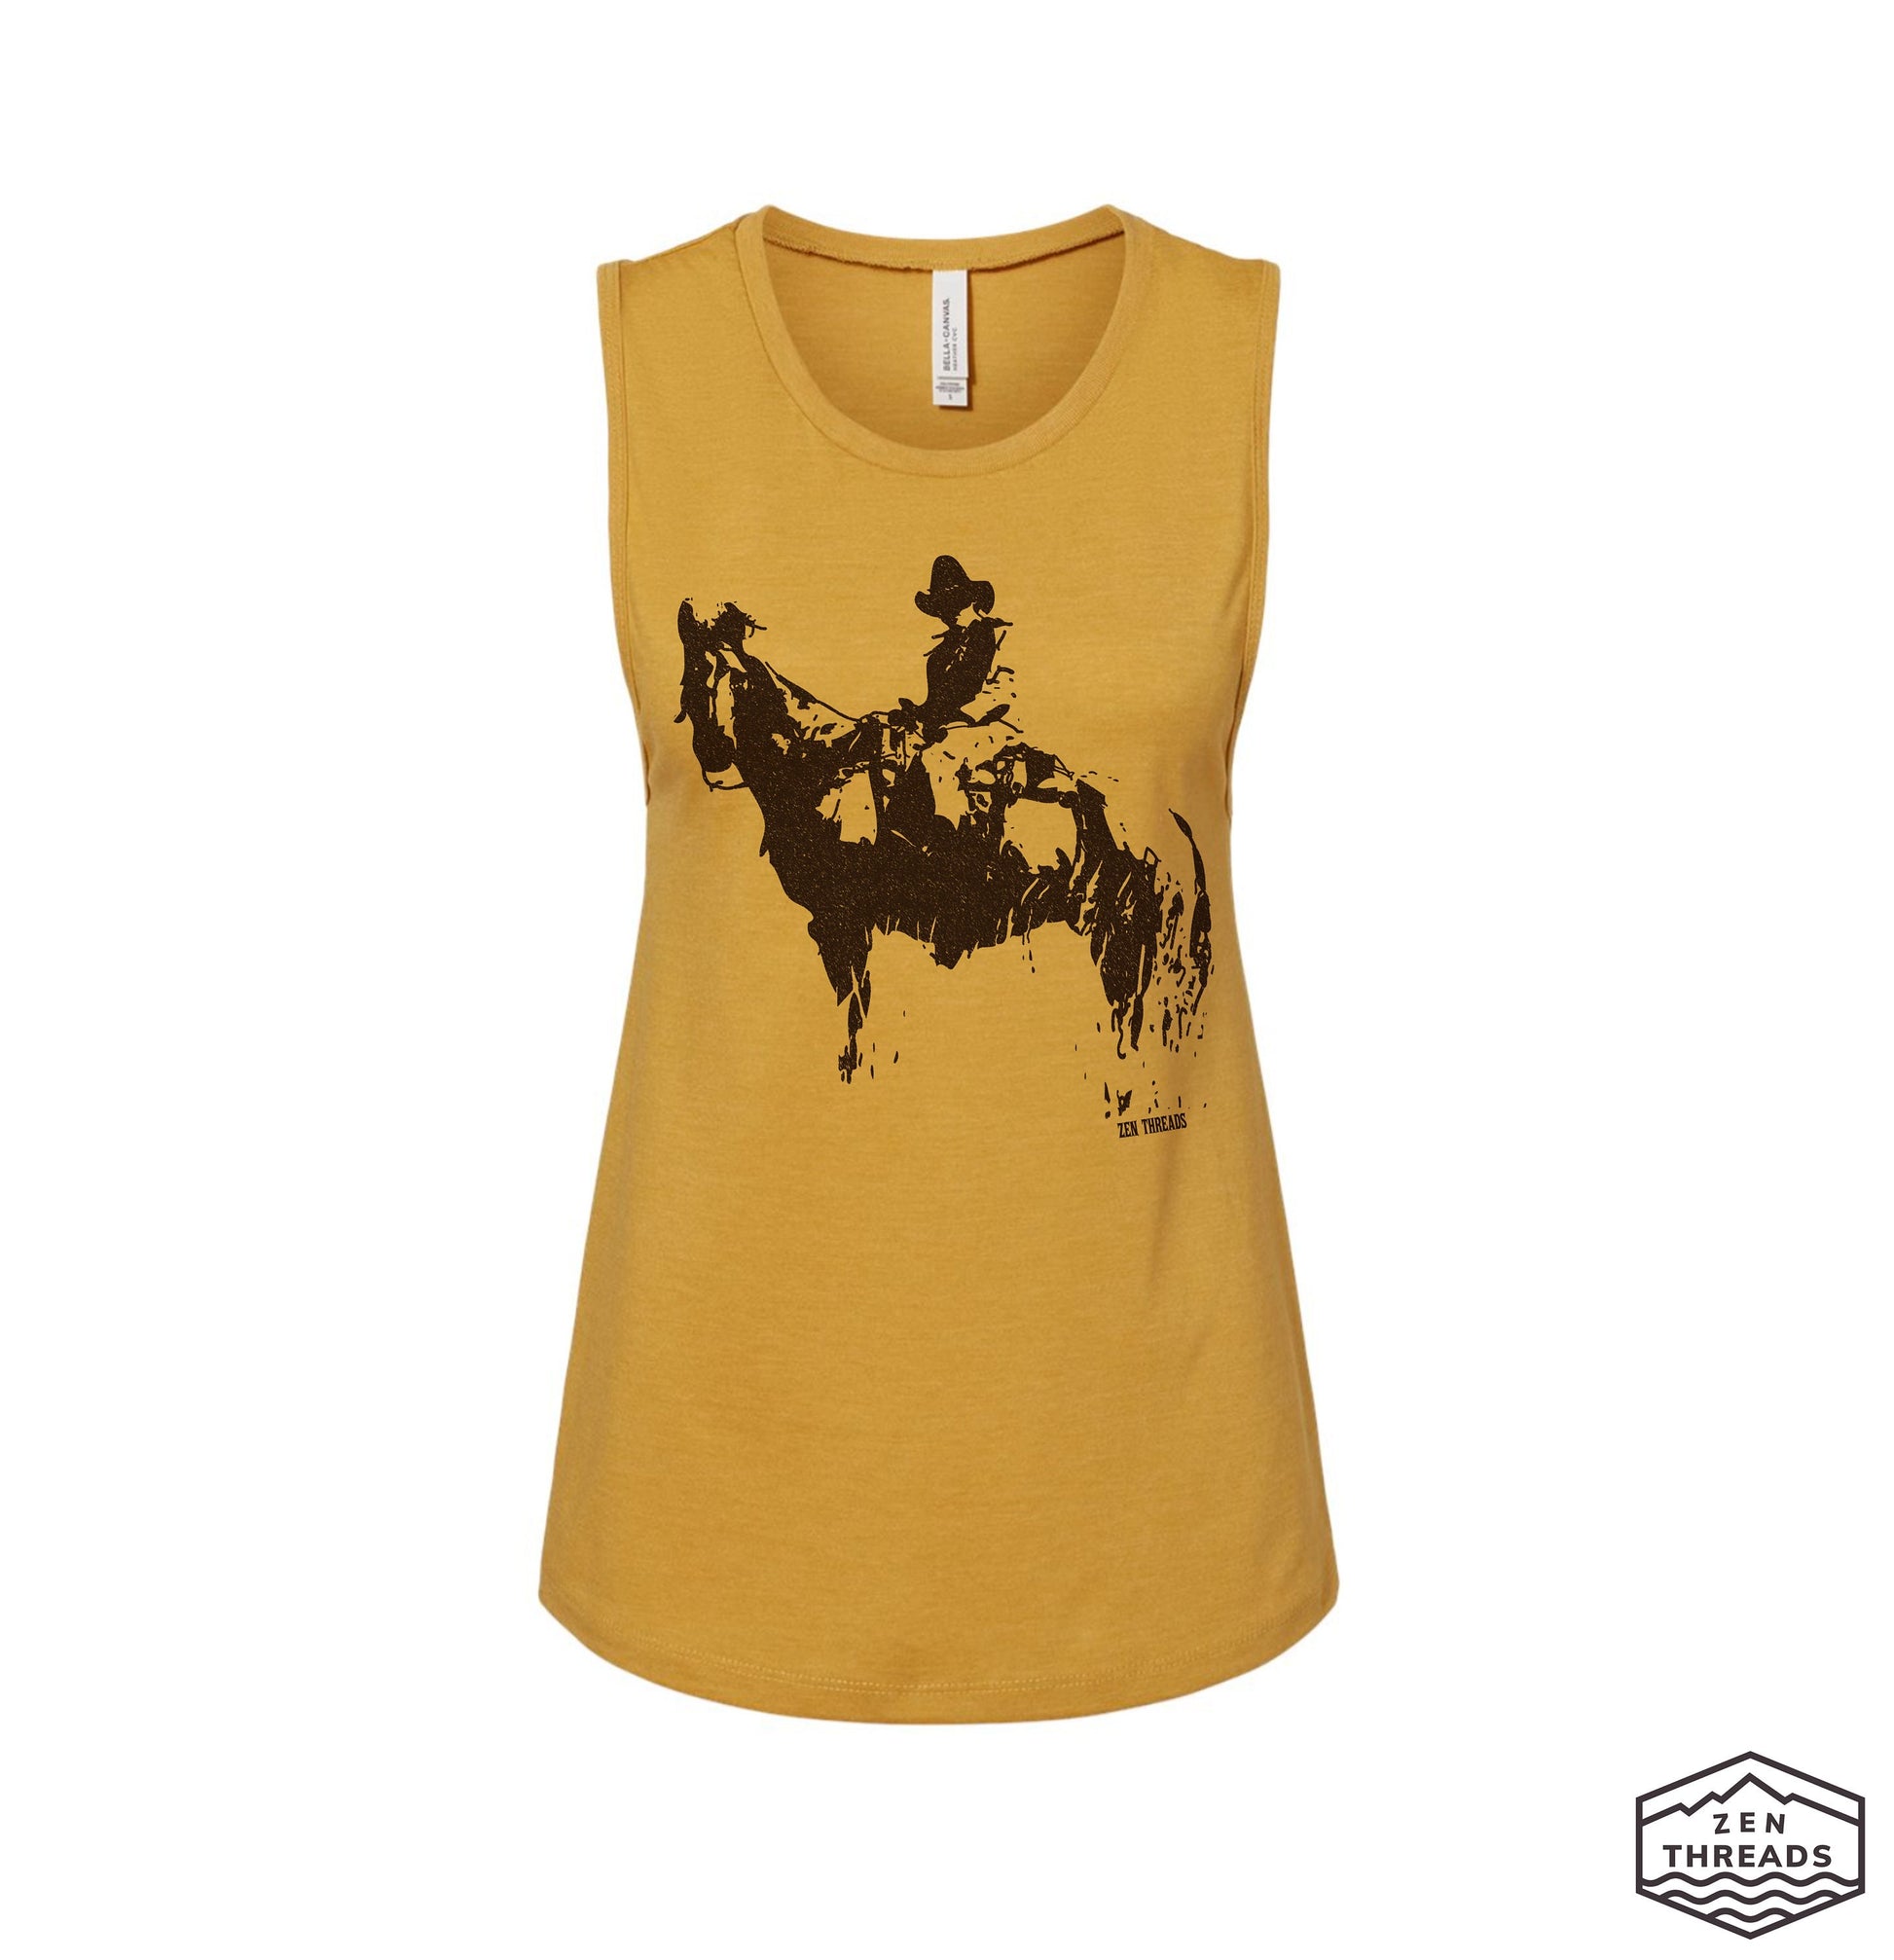 Womens COWBOY and HORSE Muscle Tank workout fitness tee western theme top t-shirt texas wrangler desert Yellowstone western wear